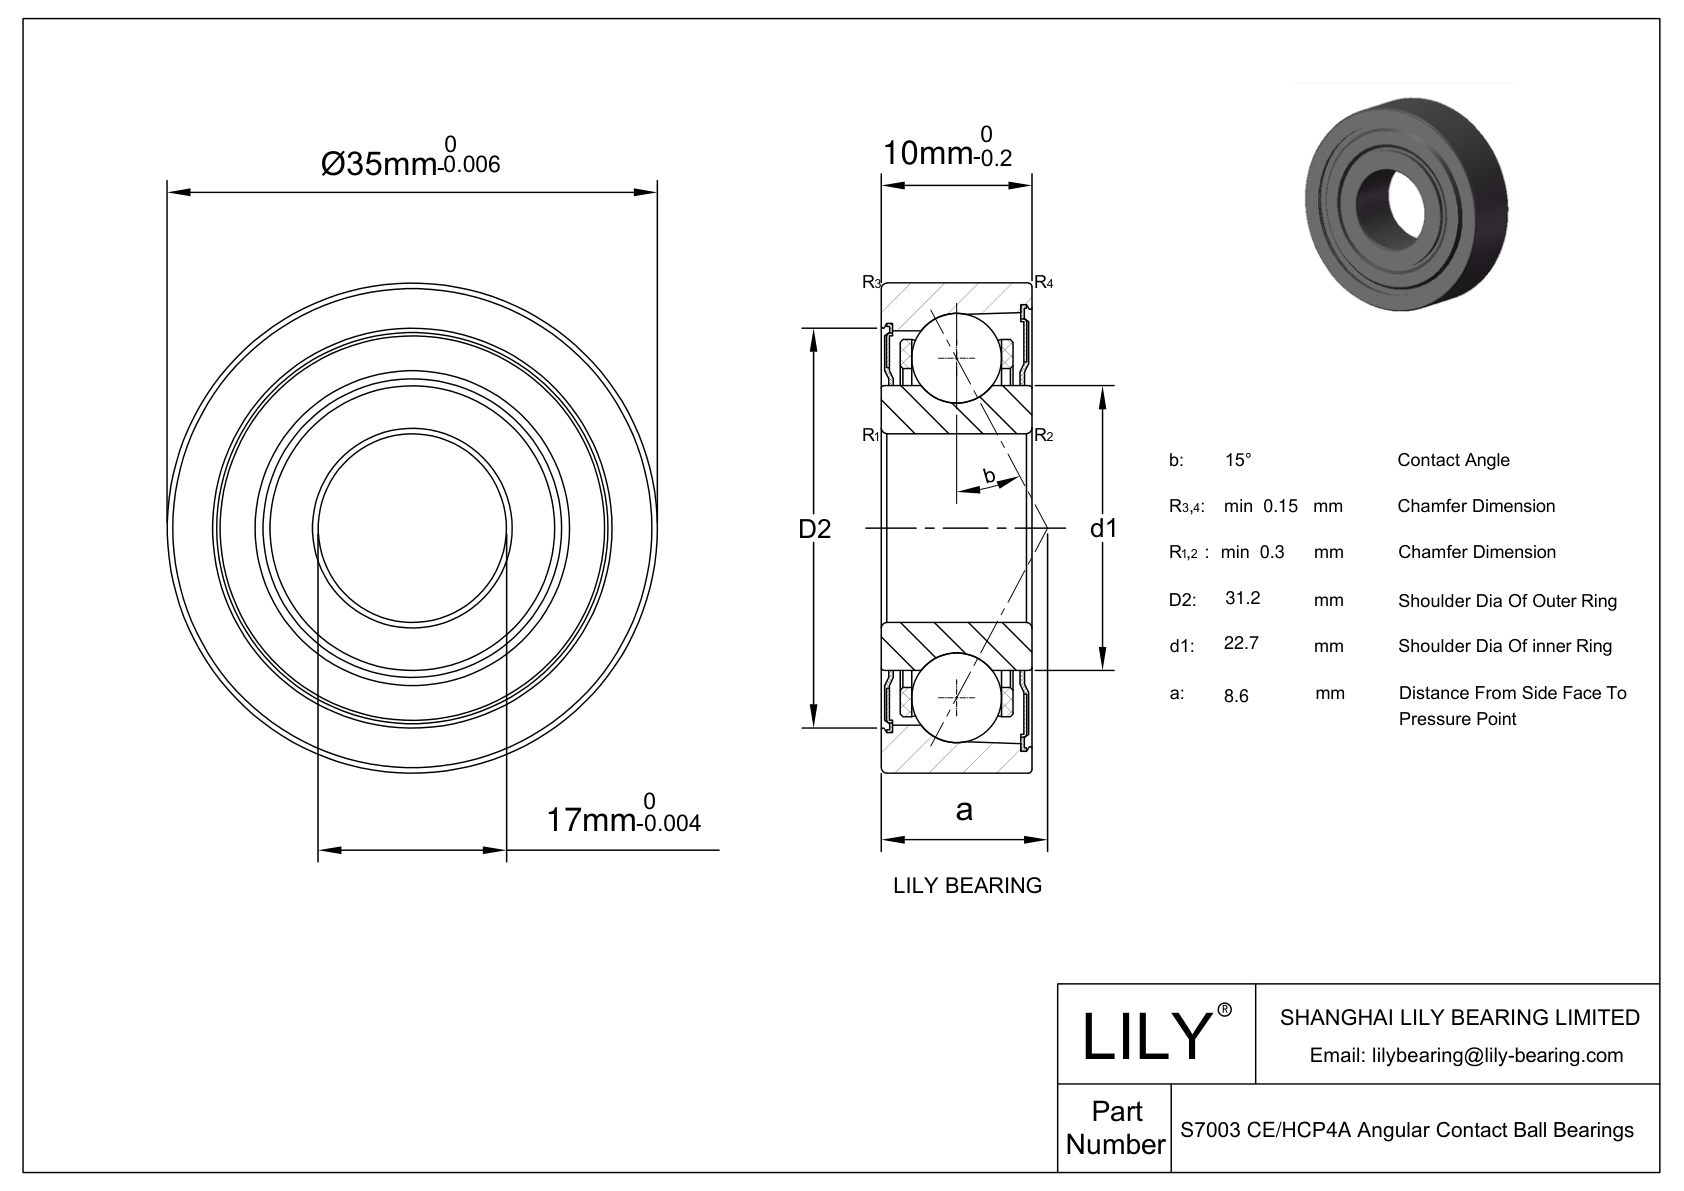 S7003 CE/HCP4A Super Precision Angular Contact Ball Bearings cad drawing